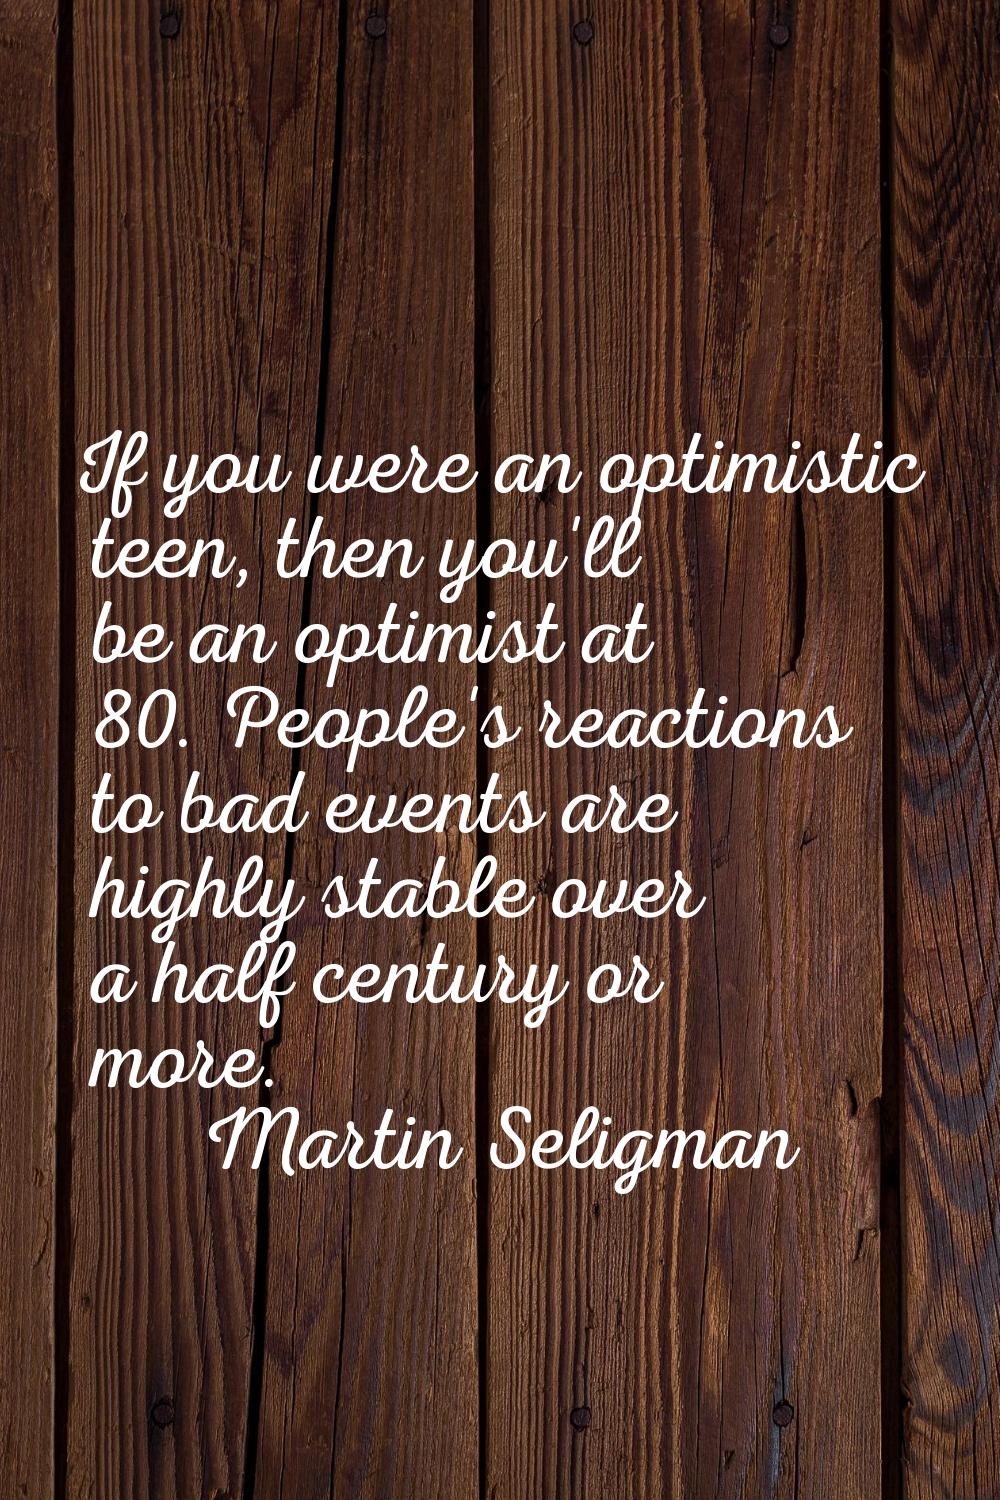 If you were an optimistic teen, then you'll be an optimist at 80. People's reactions to bad events 